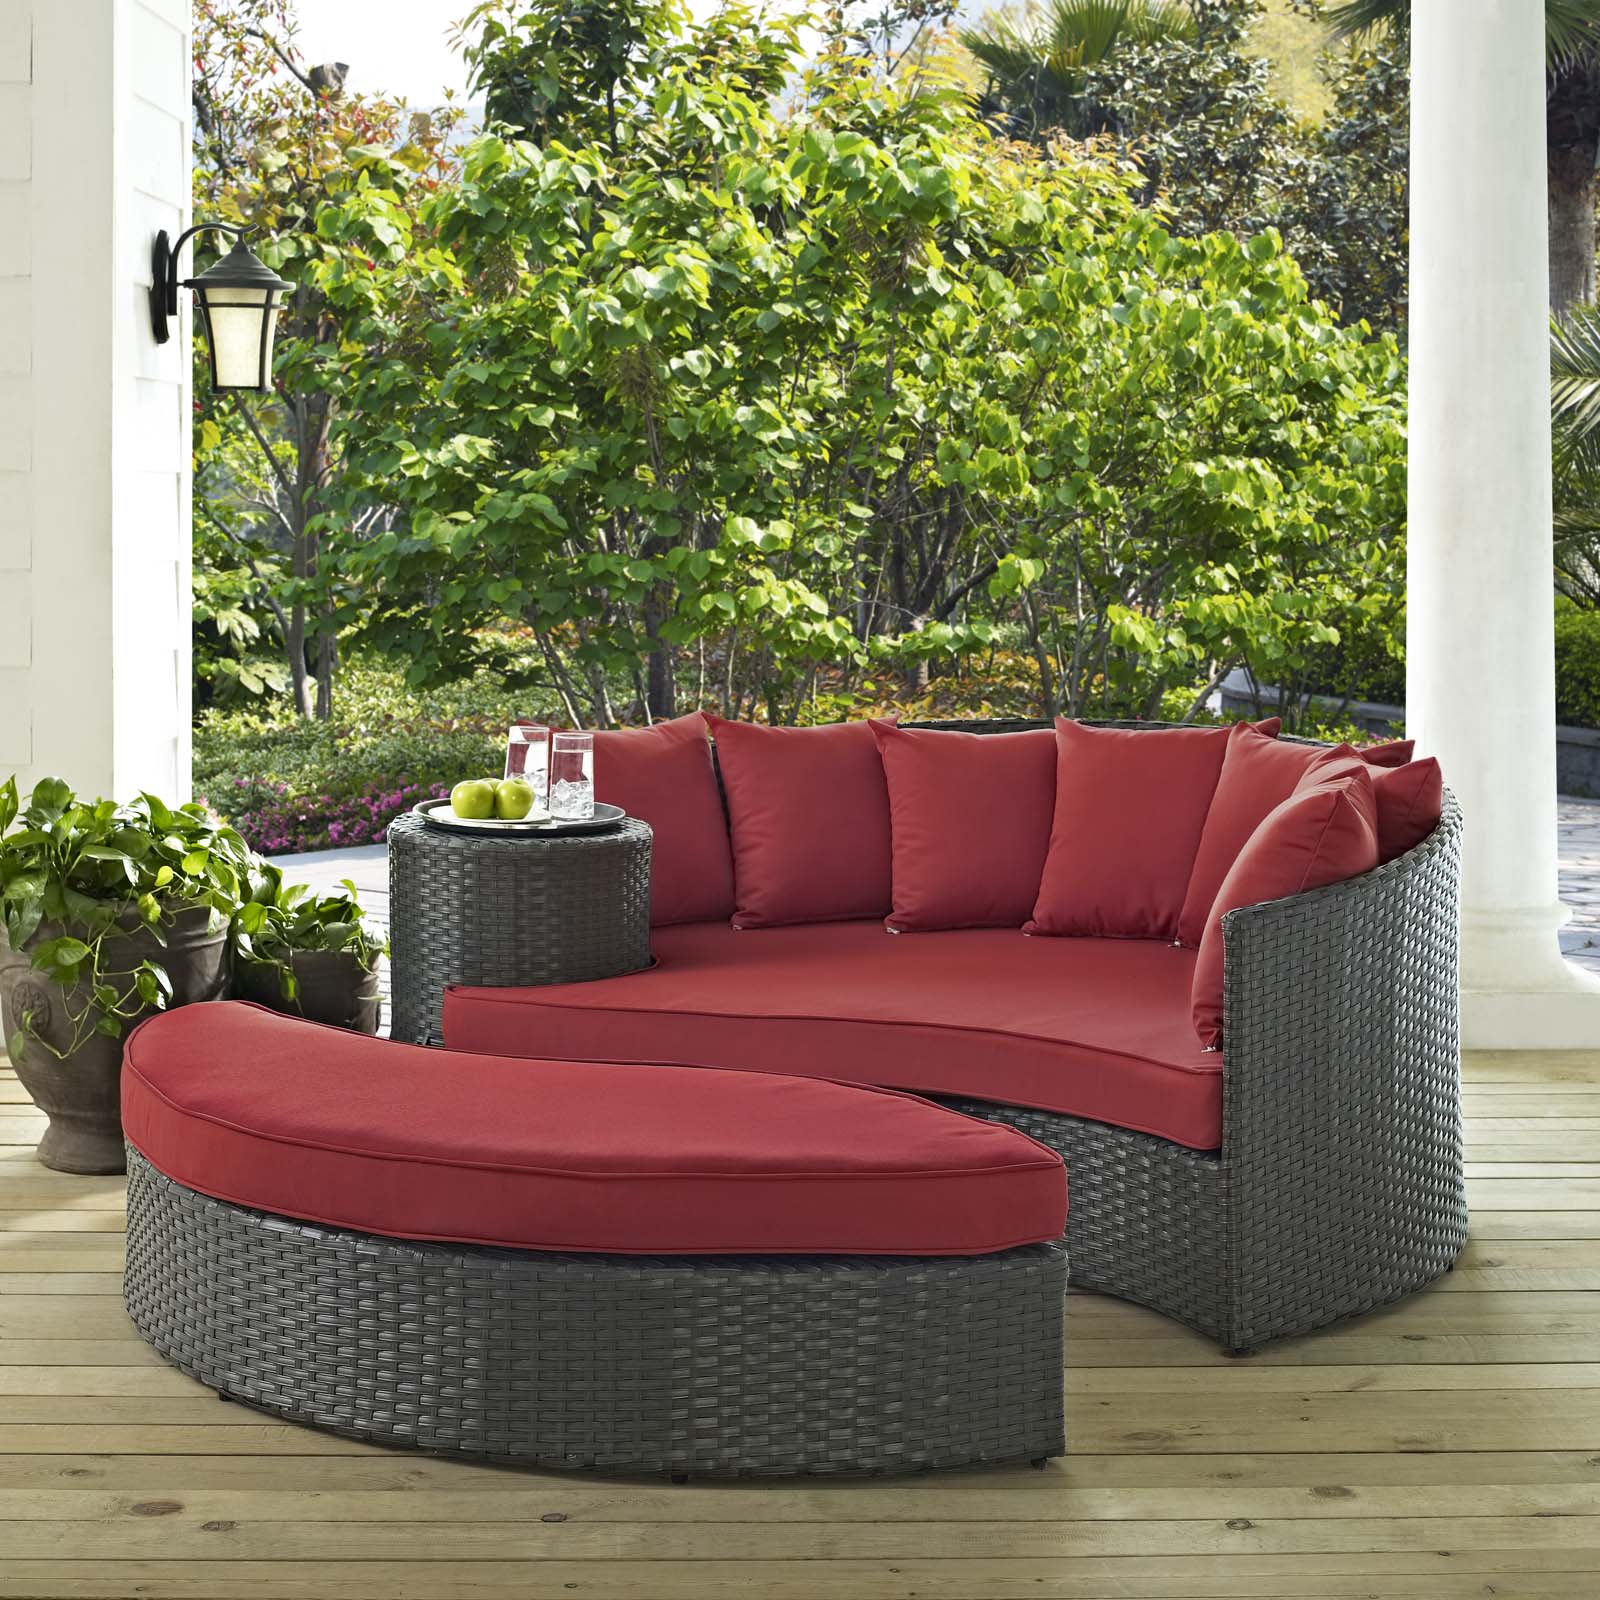 Sojourn Outdoor Patio Sunbrella Daybed Canvas Red 71"W